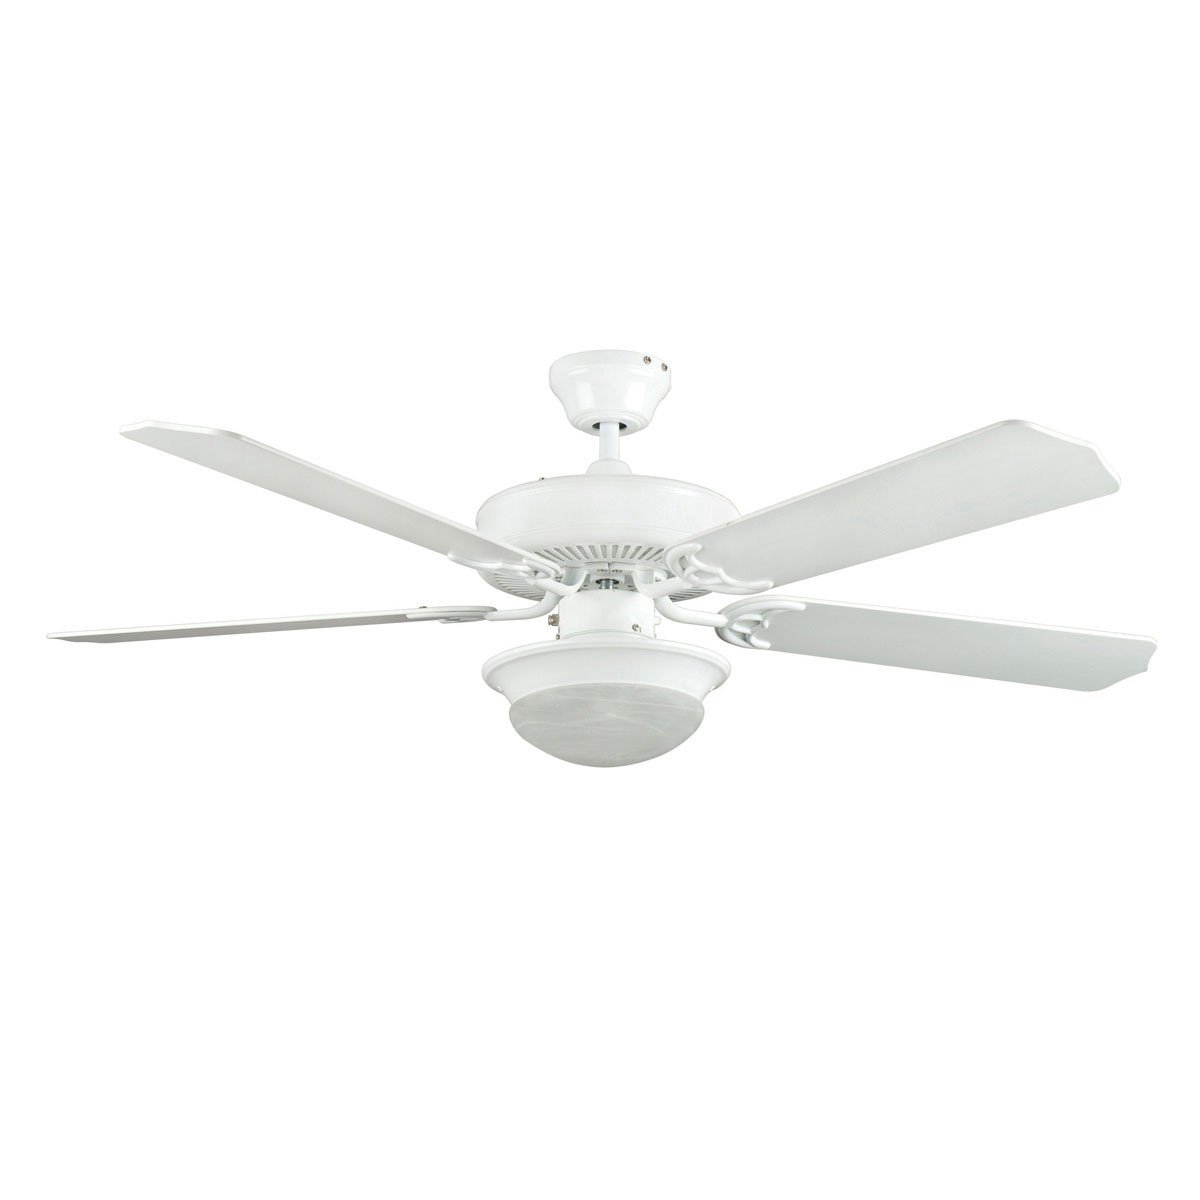 Concord Fans 52" Heritage Fusion White Modern Ceiling Fan with Round Light Kit